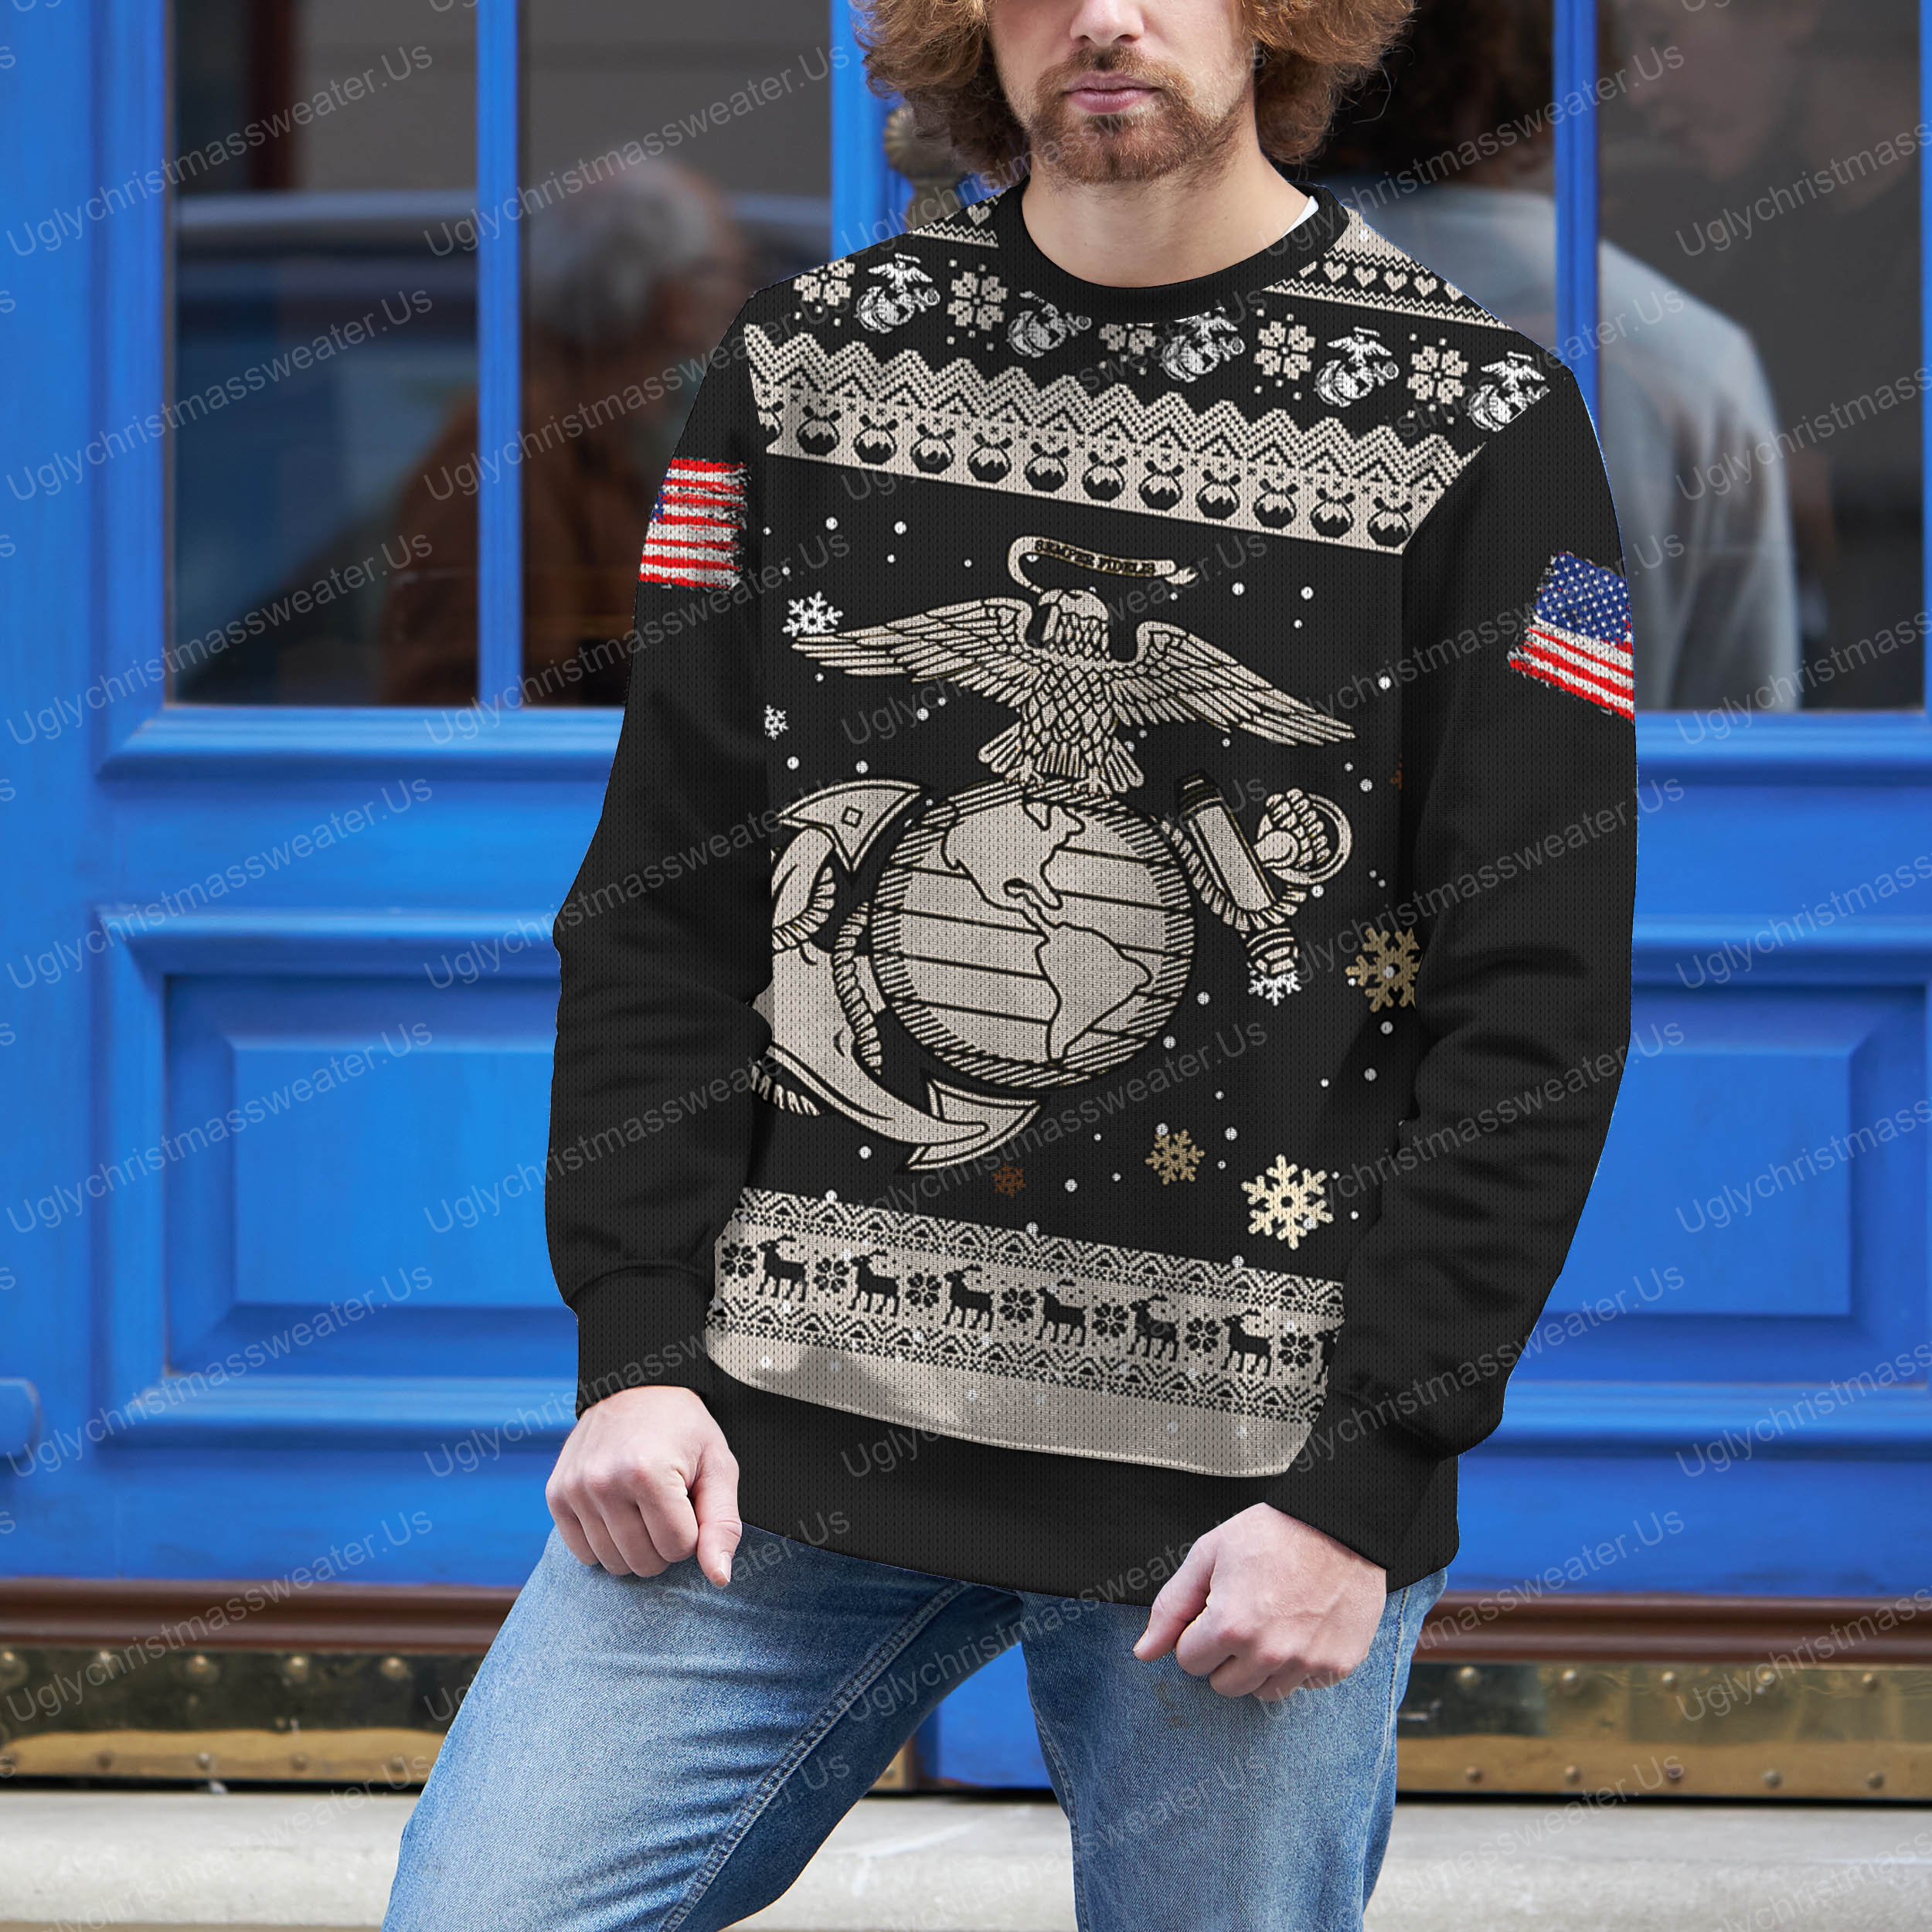 Eagle & American Flag: Marine Corps Heritage Ugly Sweater Vanilla, Black, Red And Blue